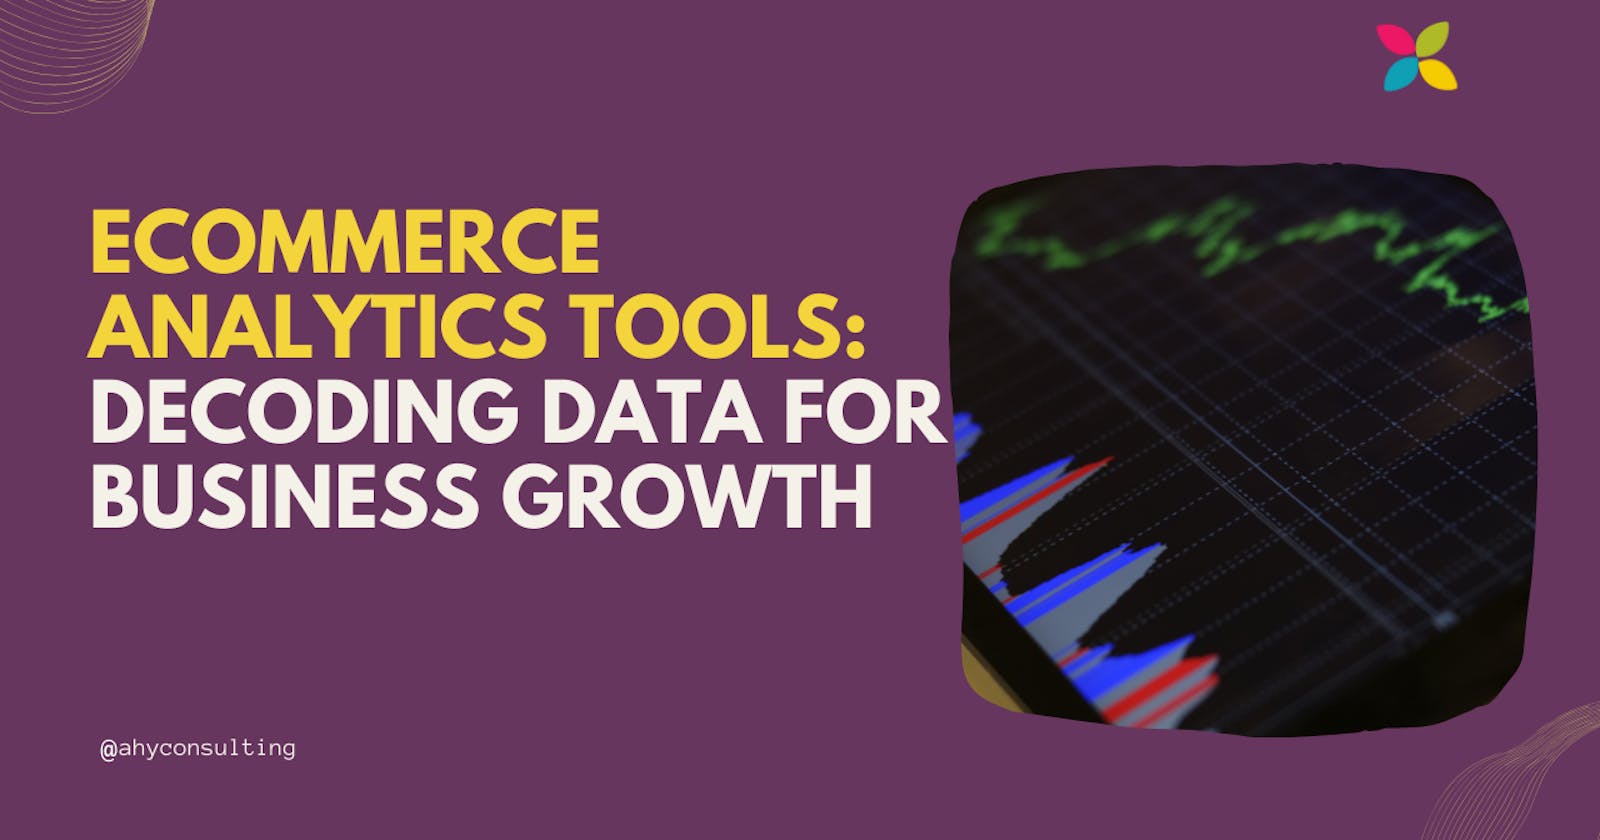 eCommerce Analytics Tools: Decoding Data for Business Growth